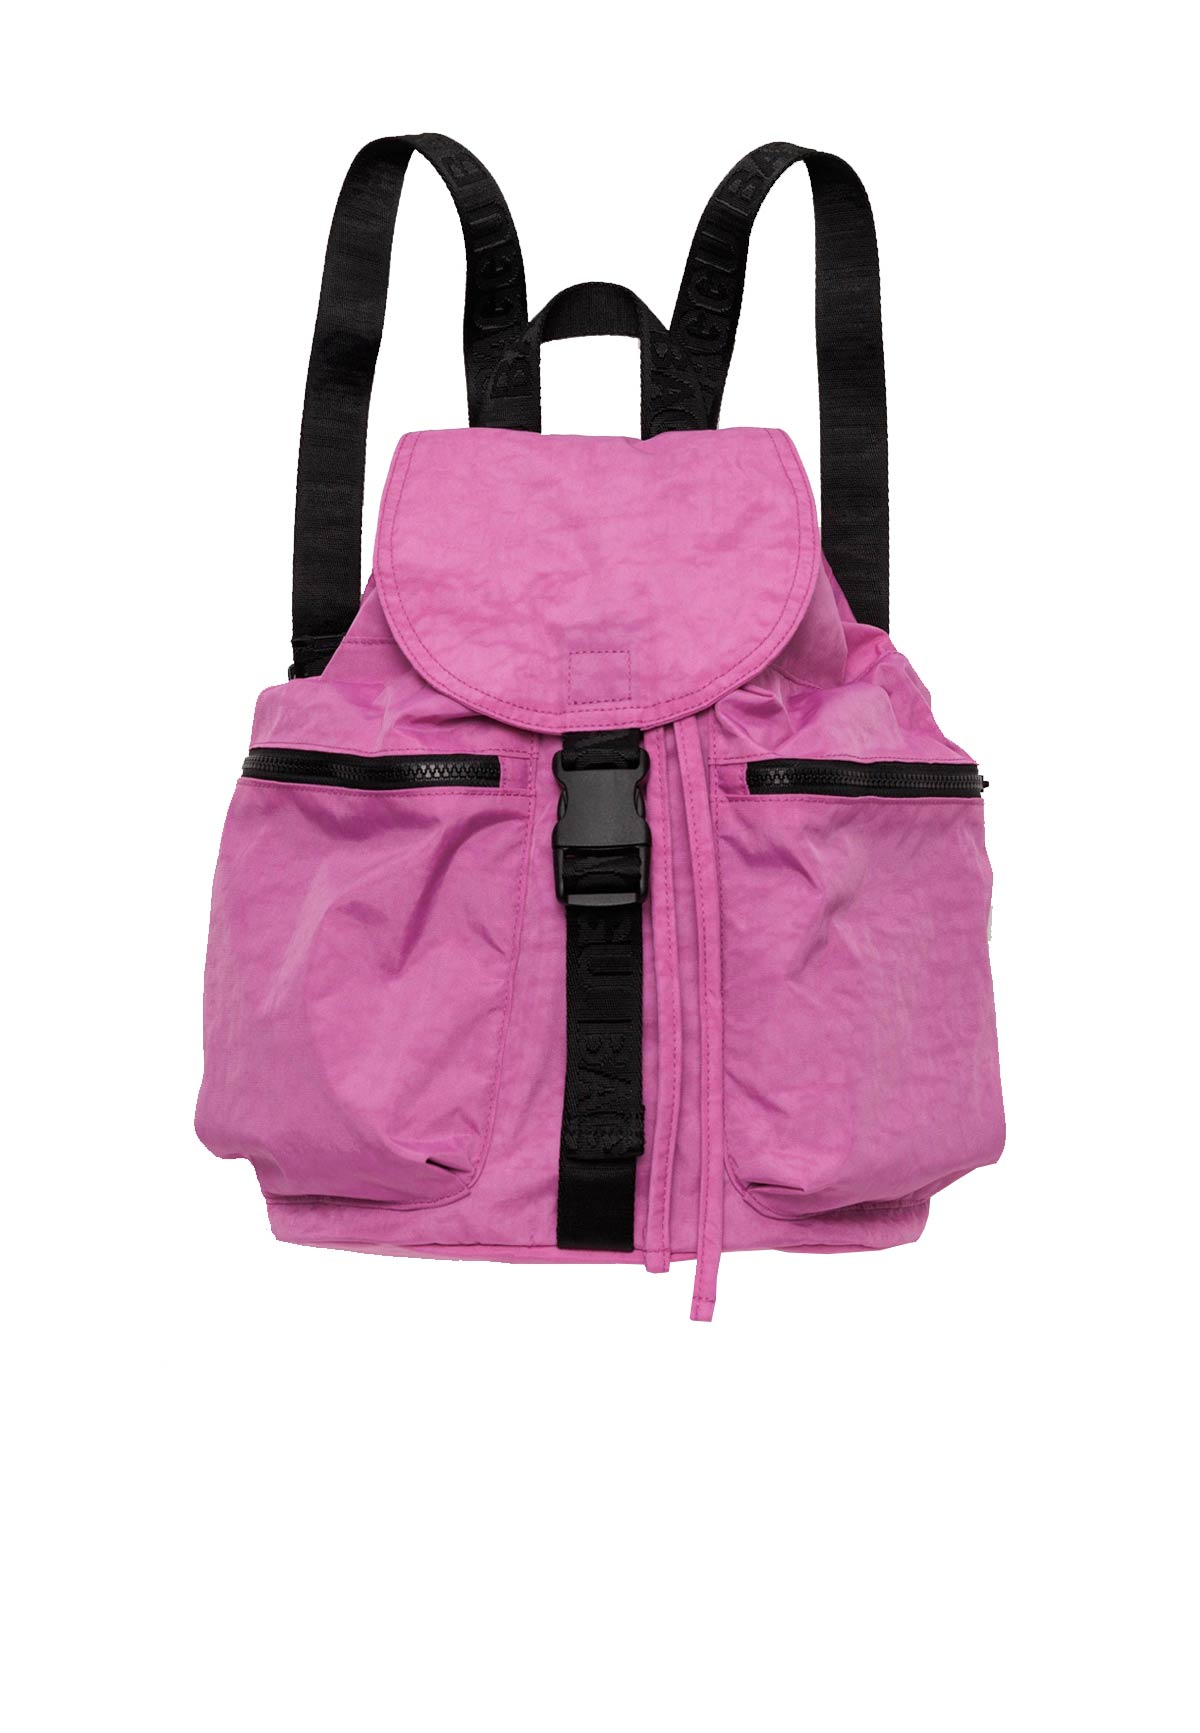 SMALL SPORT BACKPACK EXTRA PINK